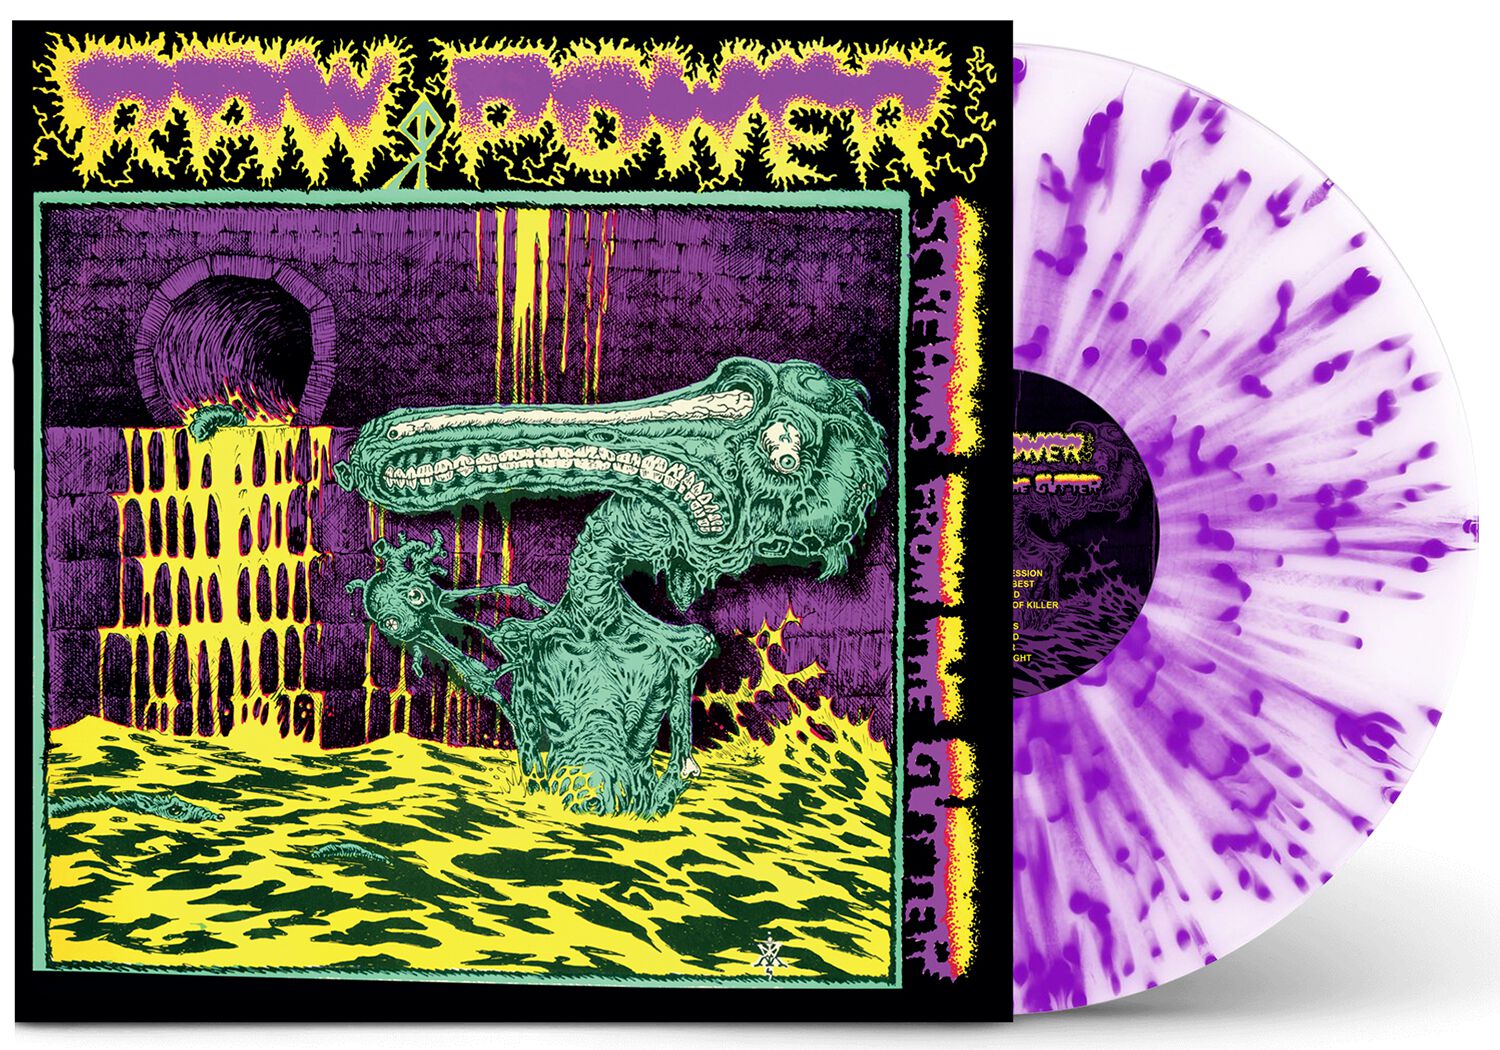 Image of Raw Power Screams from the gutter LP splattered